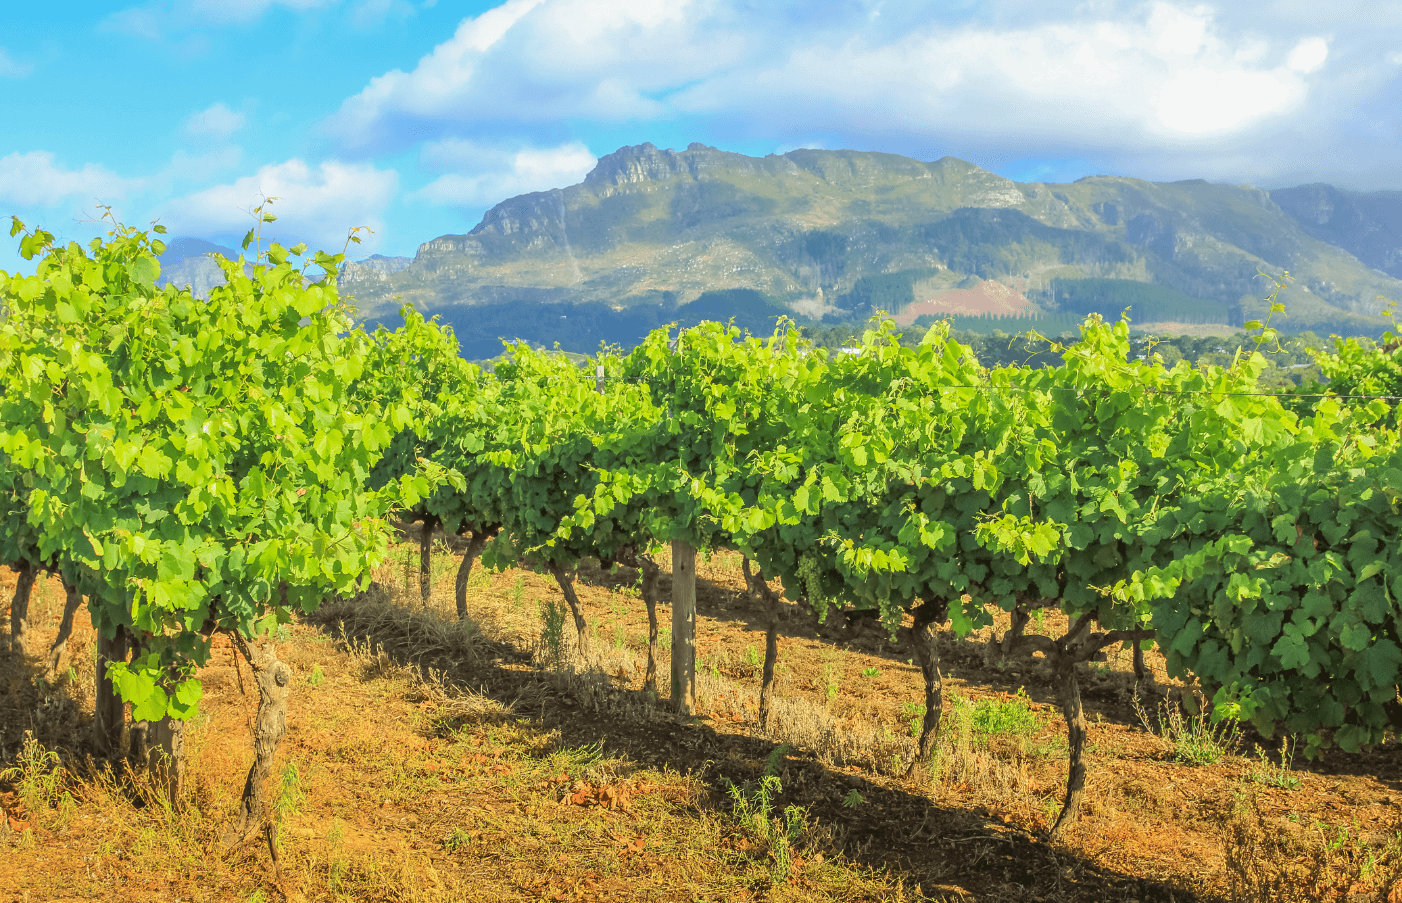 Tag 4: Cape Winelands